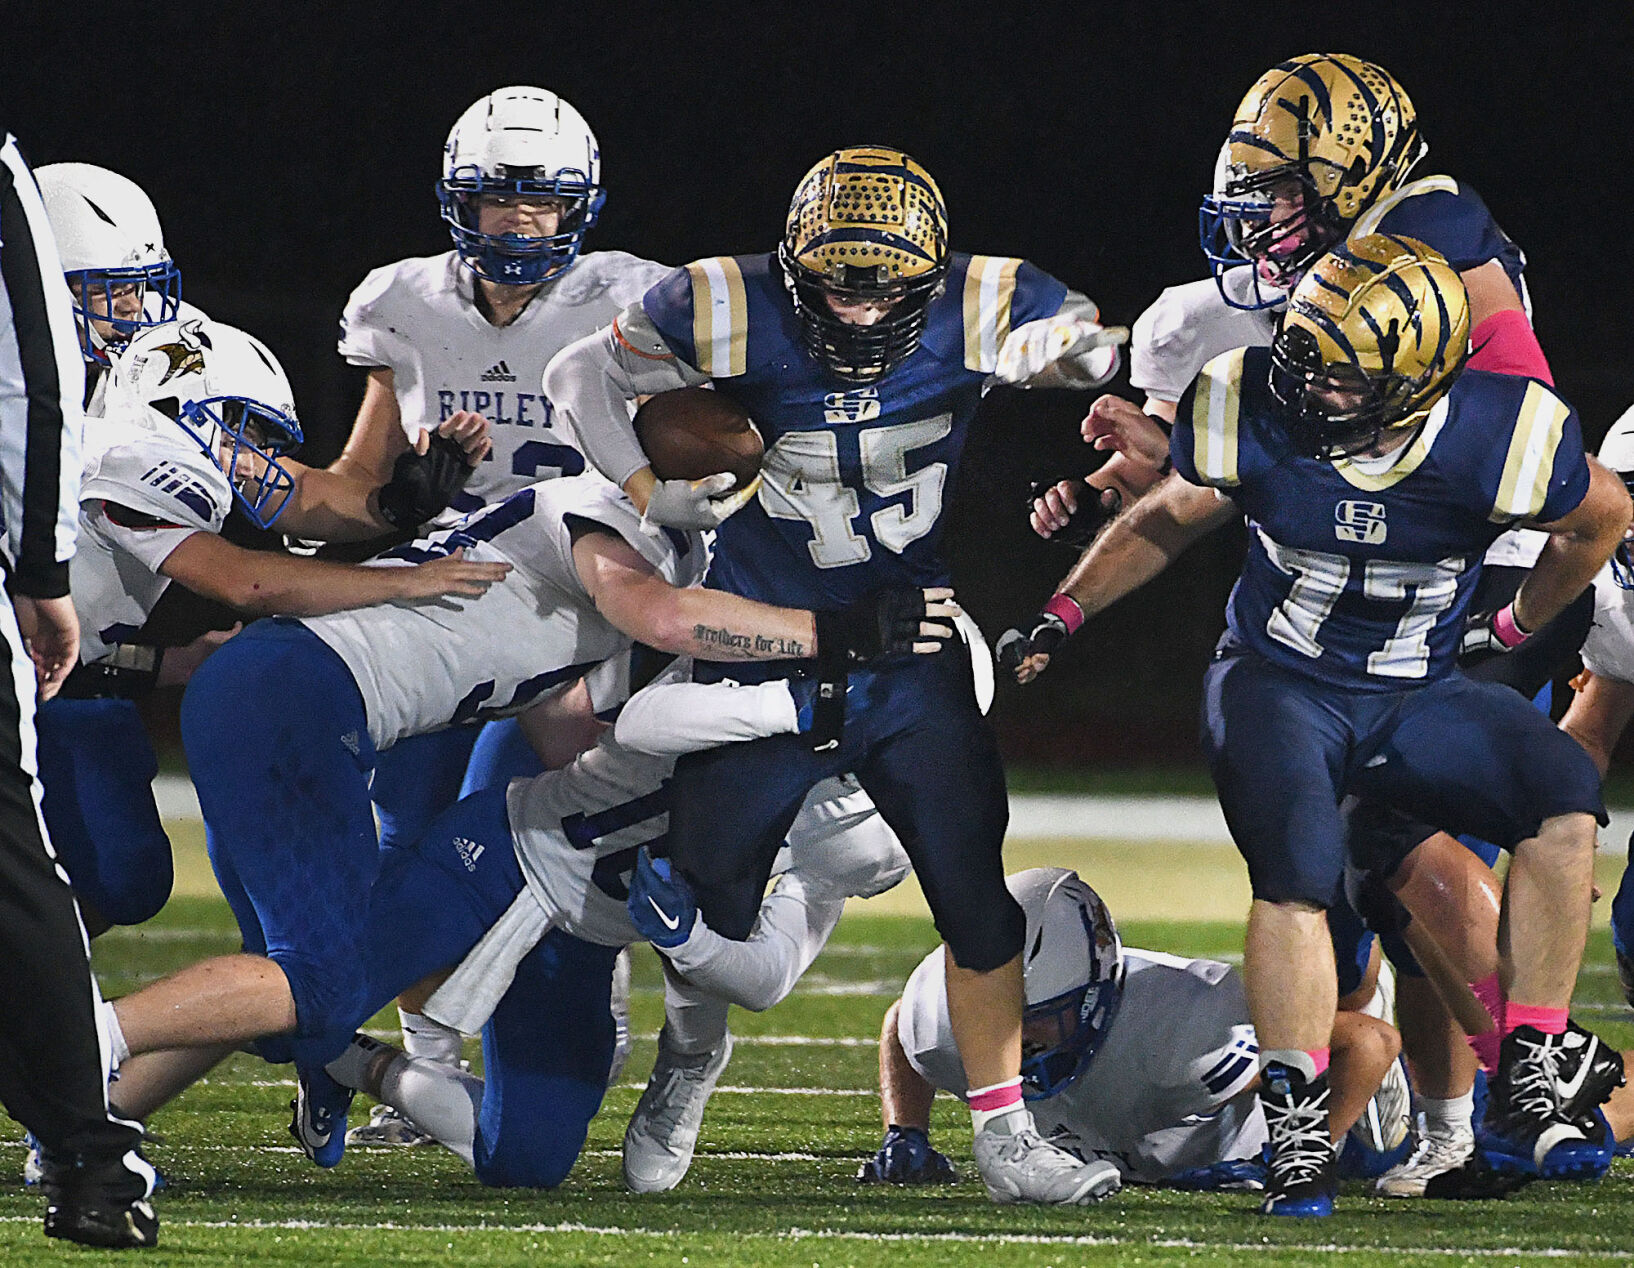 Gavin Davis dominates with 306 yards and five touchdowns in Shady Spring’s victory over Ripley